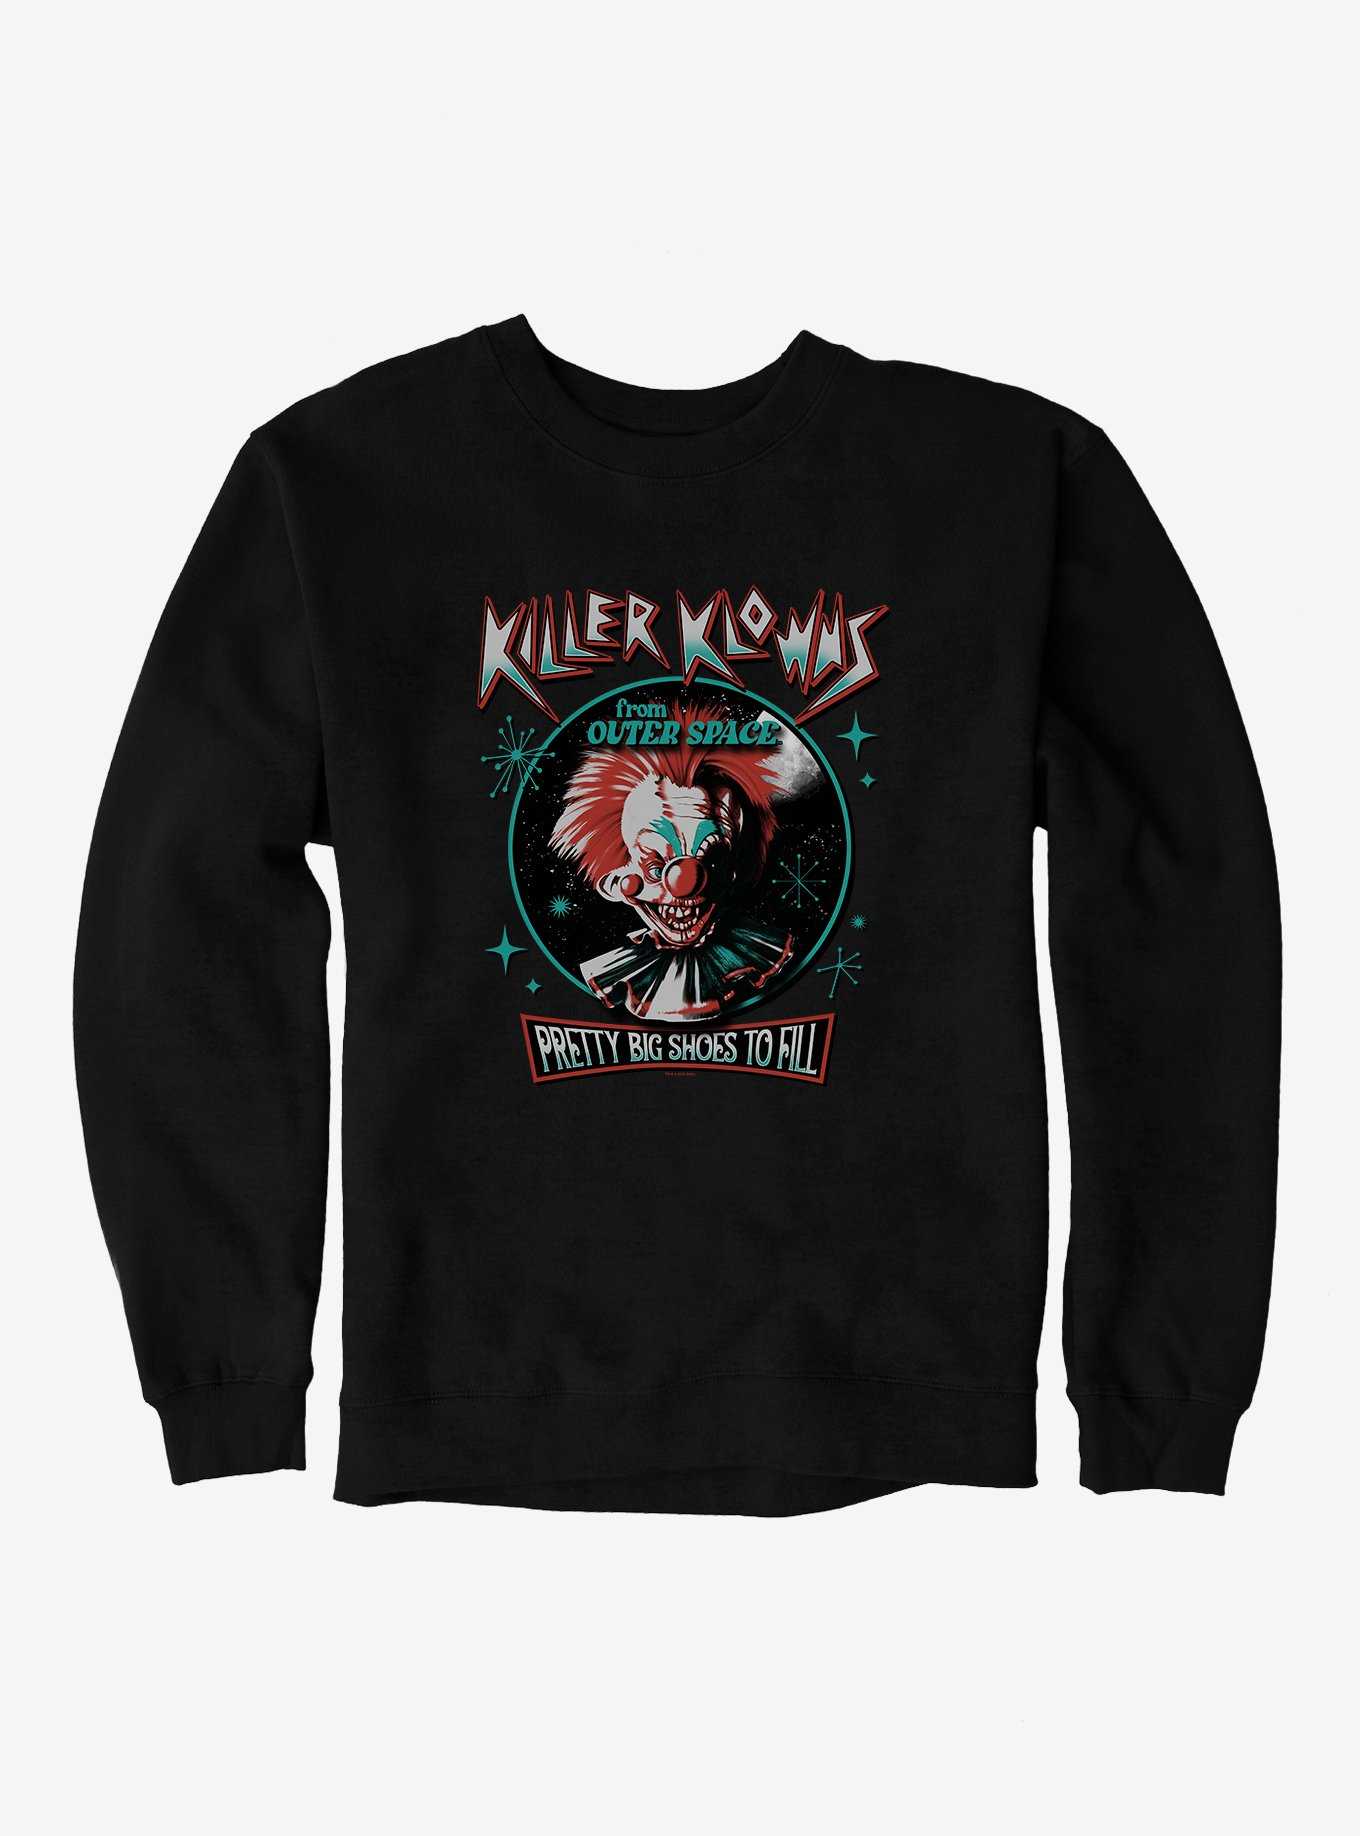 Killer Klowns From Outer Space Pretty Big Shoes To Fill Sweatshirt, , hi-res